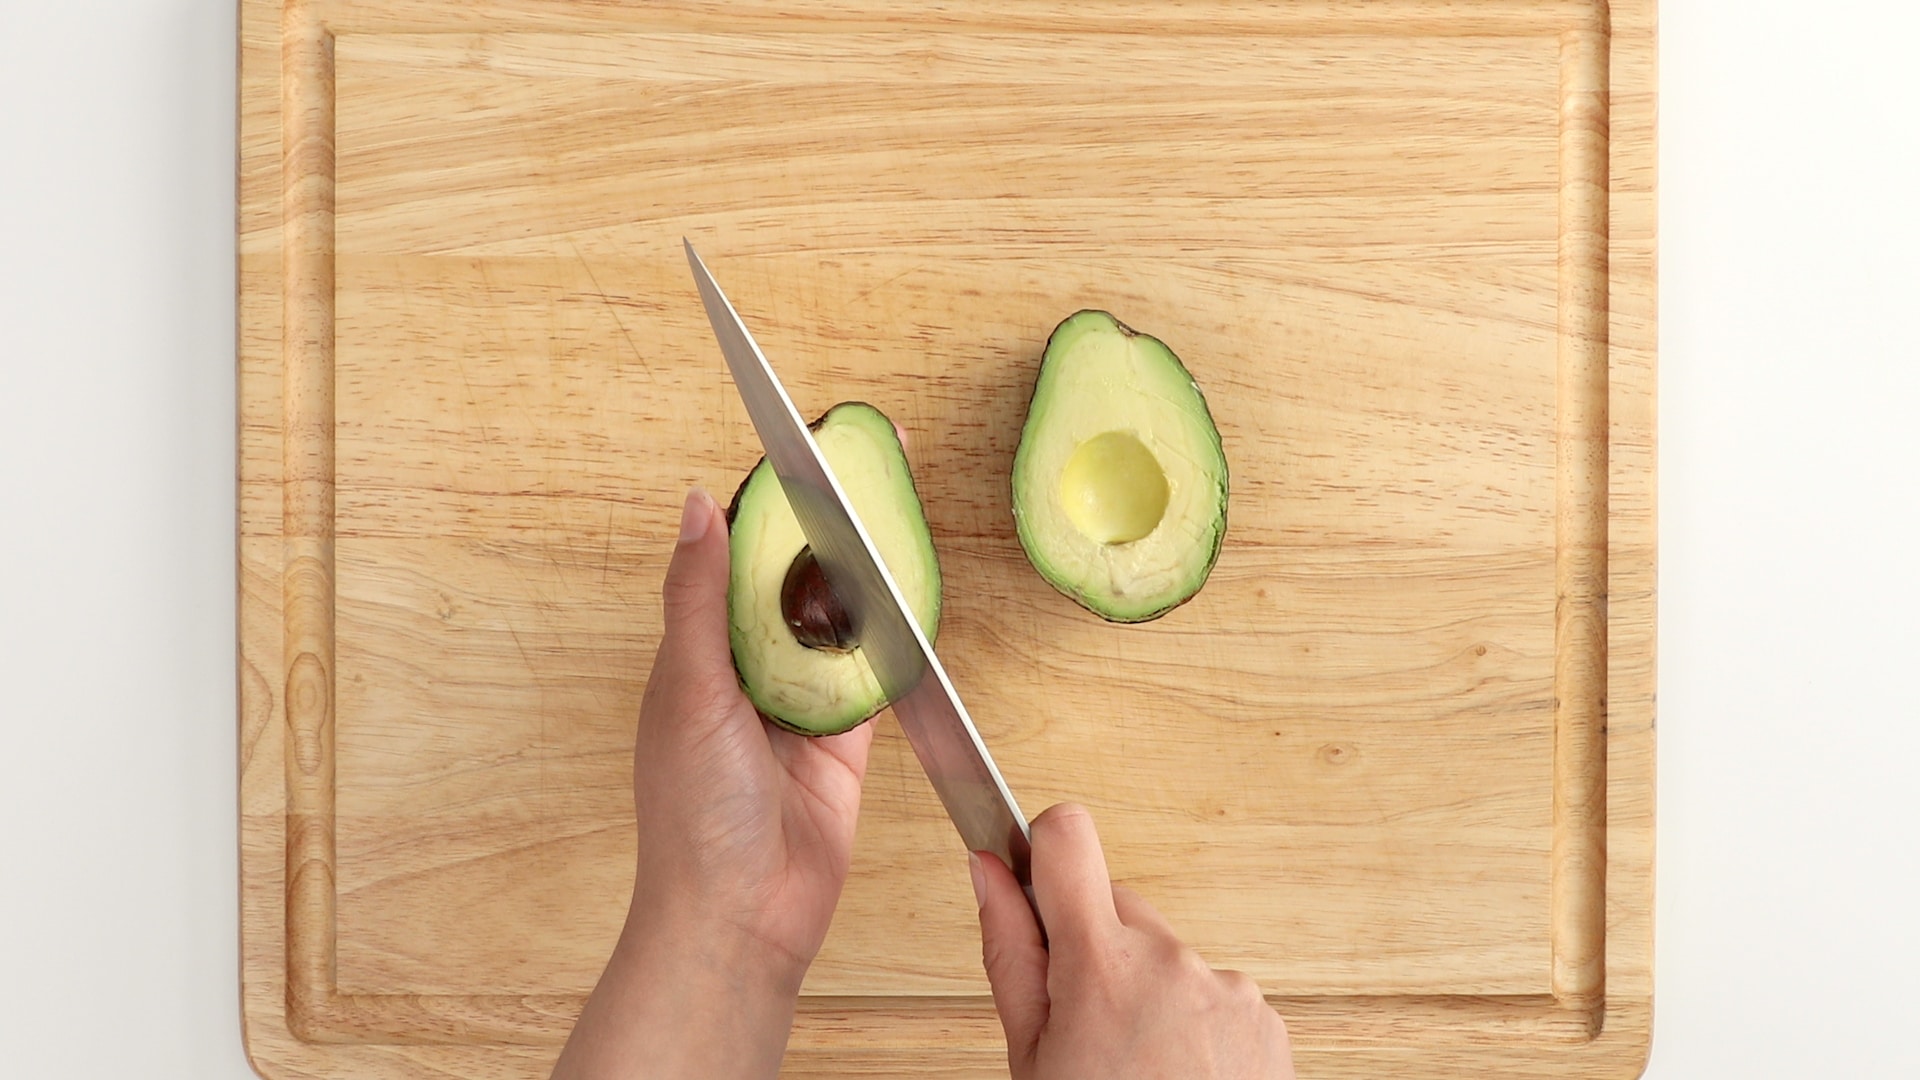 https://www.paeats.org/wp-content/uploads/2021/04/How-to-Cut-an-Avocado_5.jpg